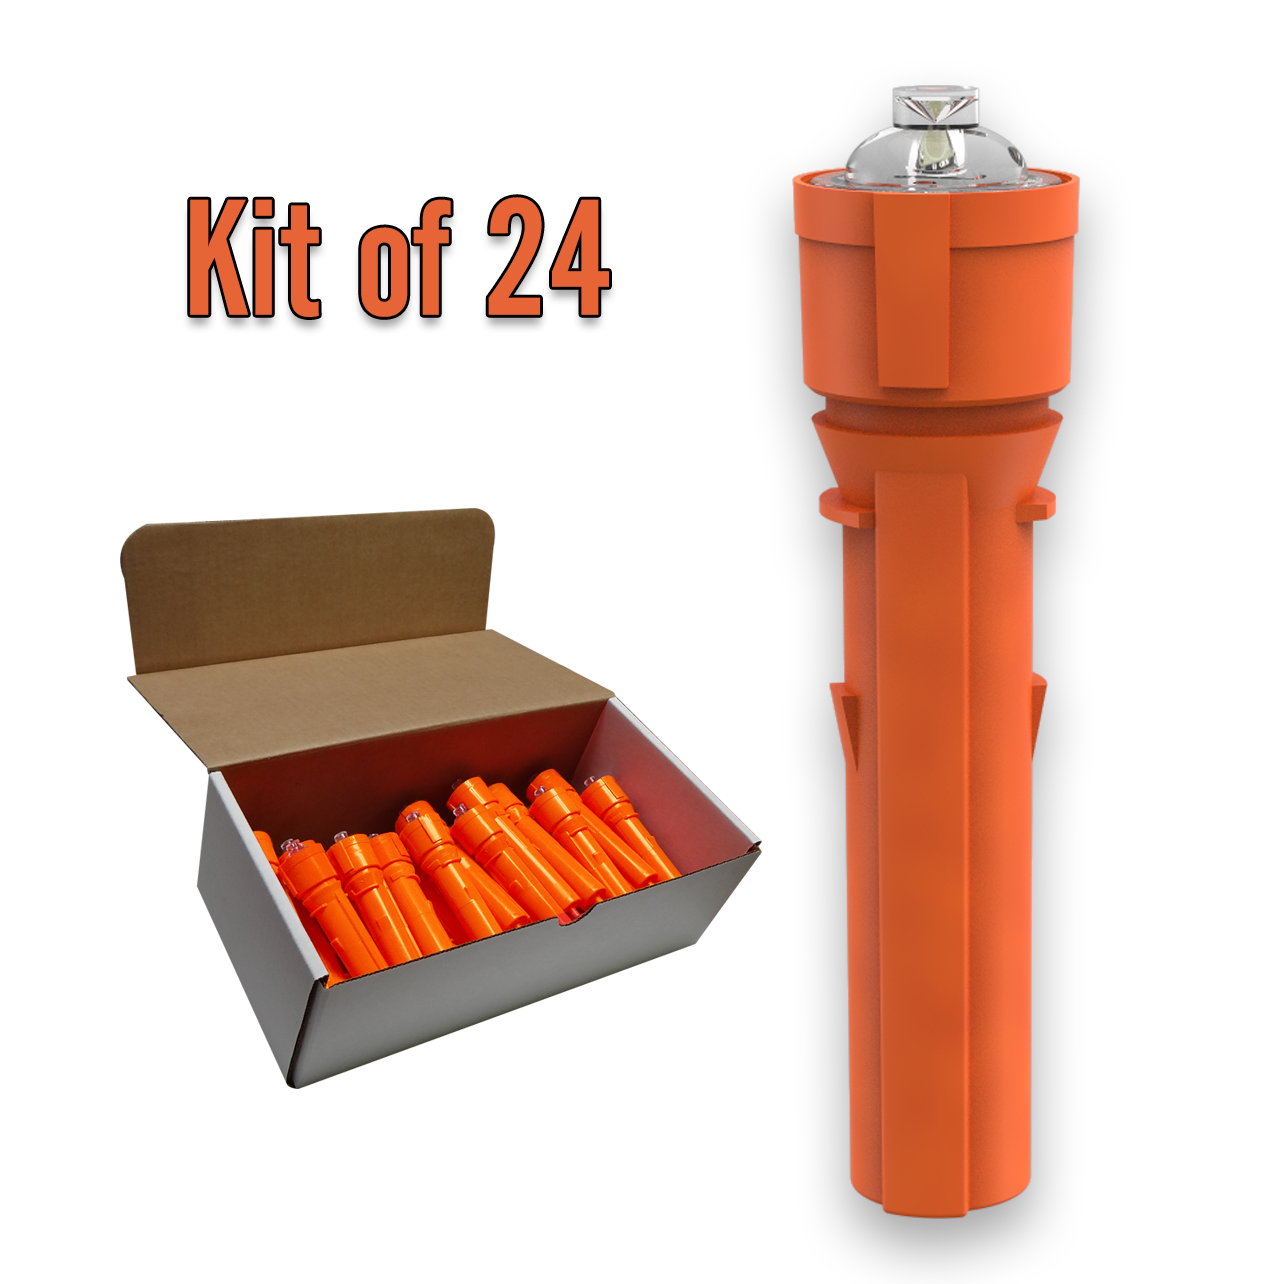 ThriftyFlare™ Cone C Kit #6263 (For Collapsible Traffic Cones)